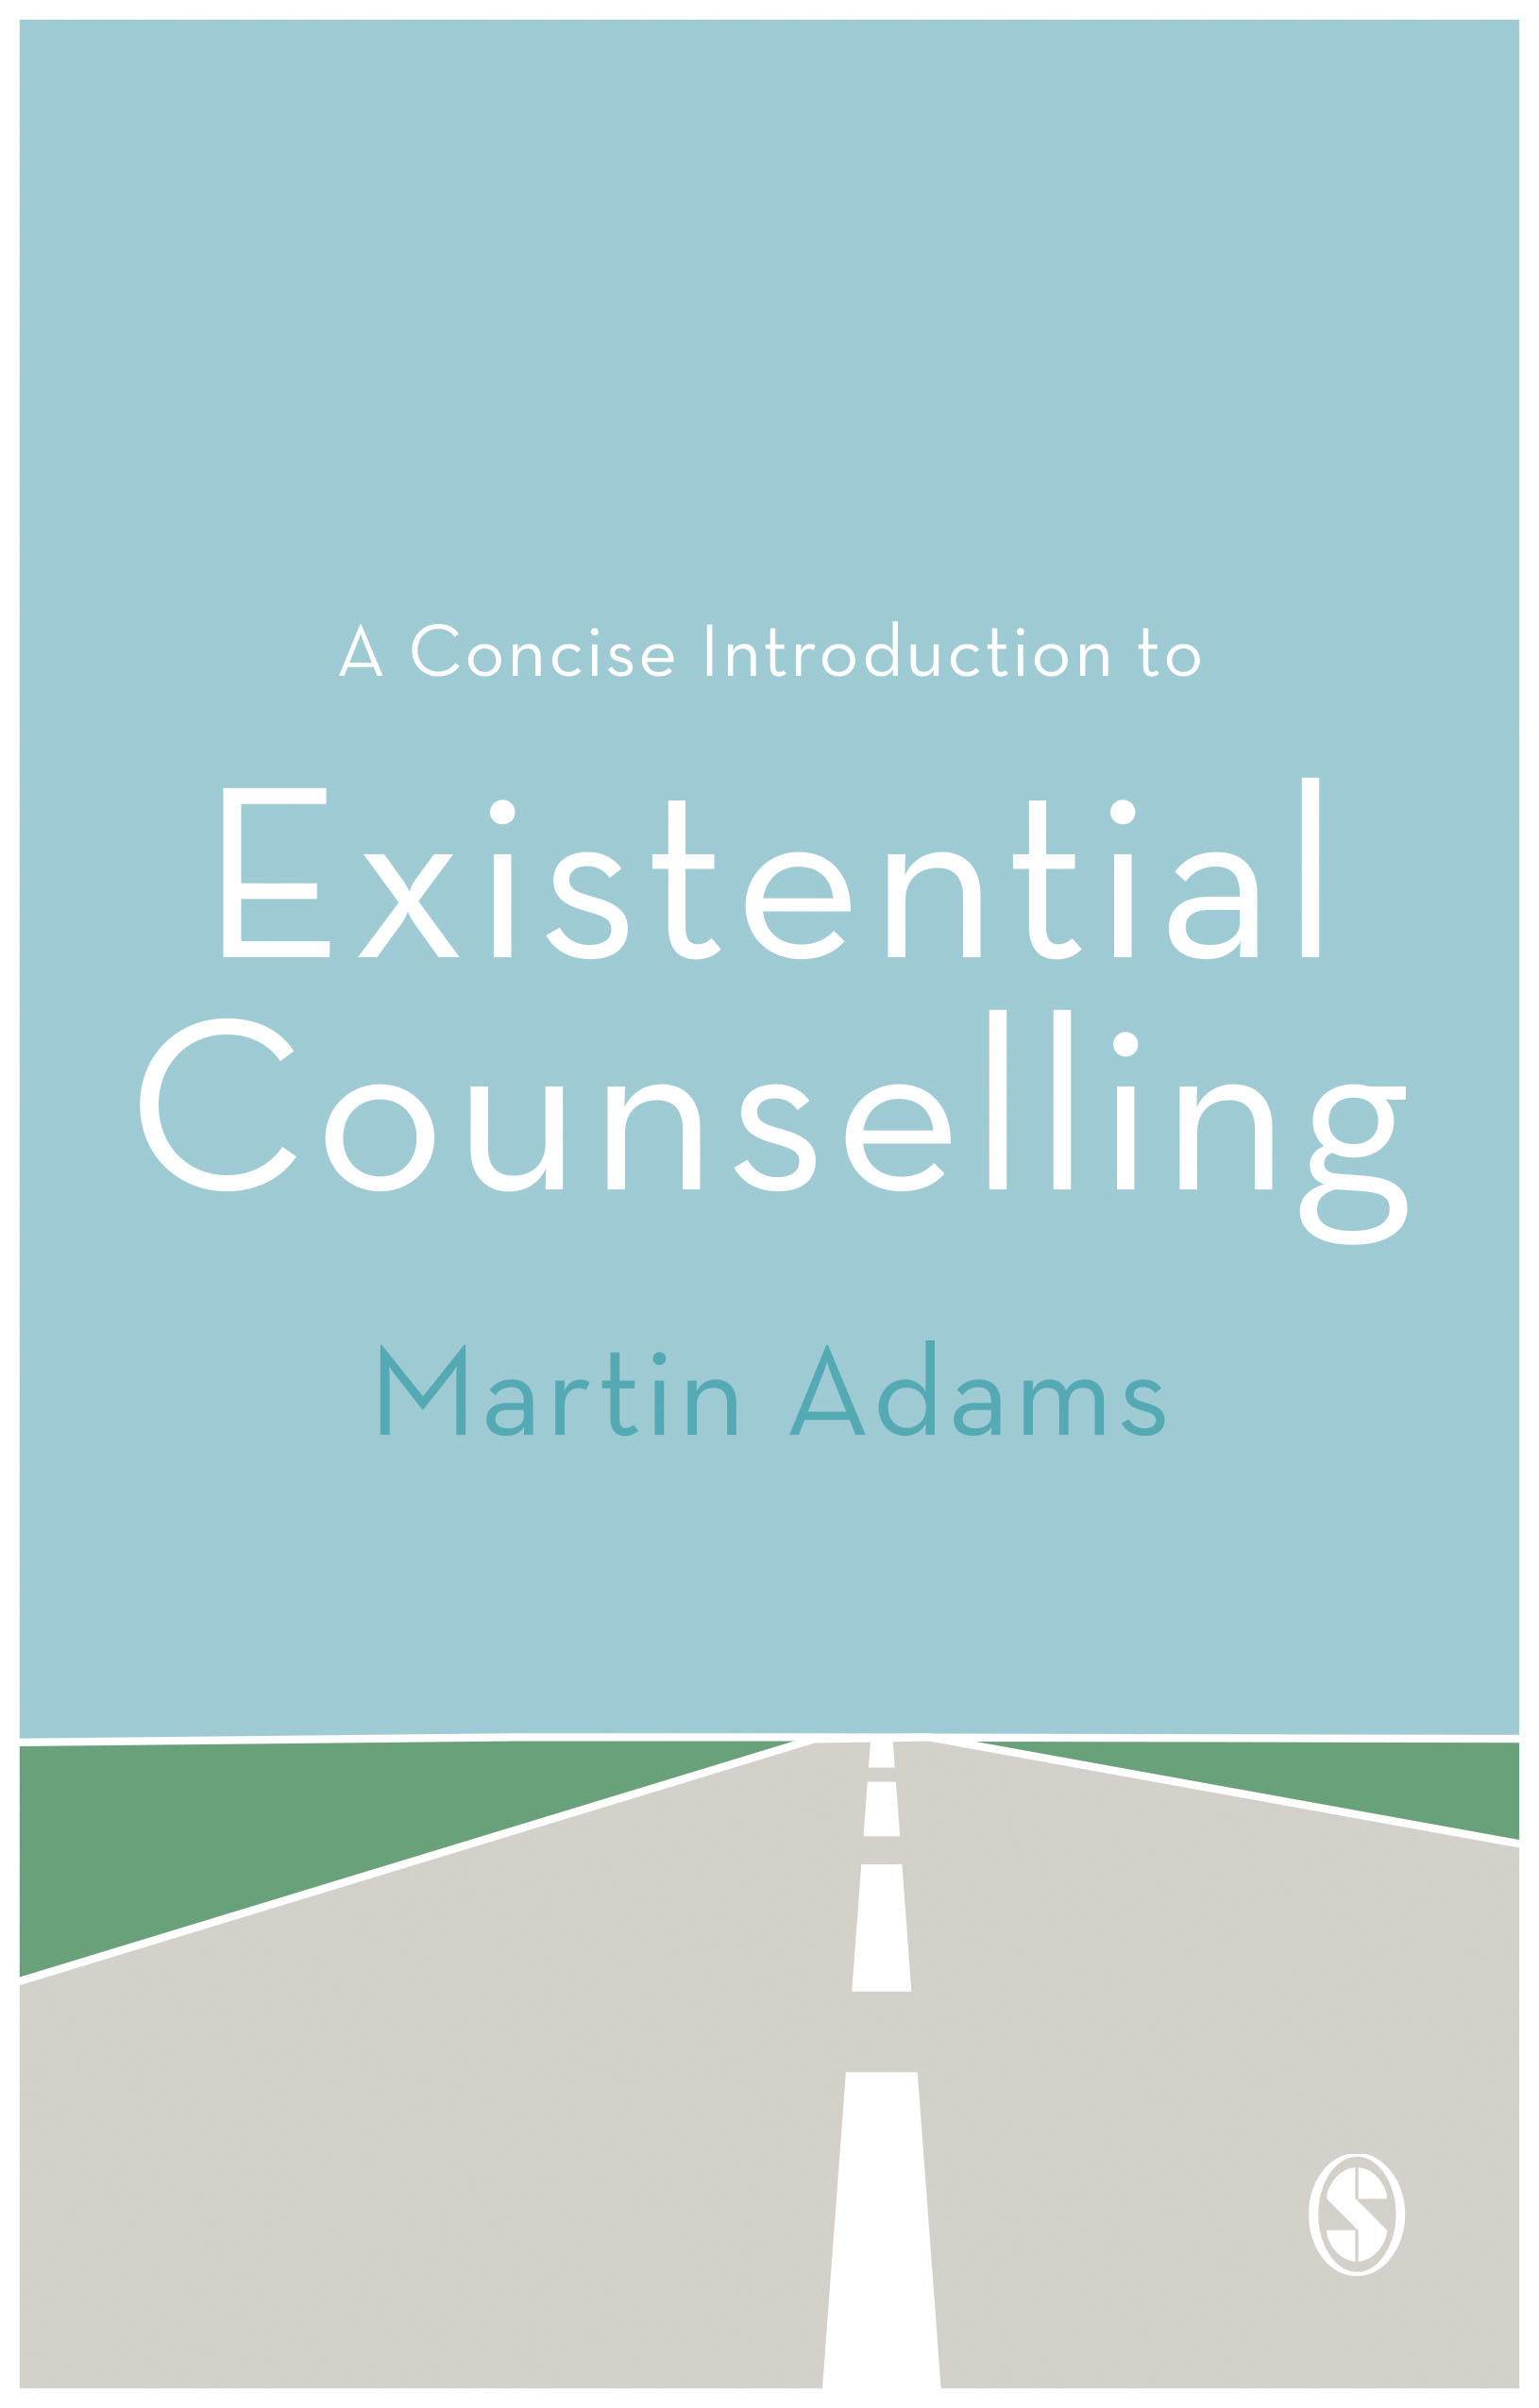 A Concise Introduction to Existential Counselling book cover 